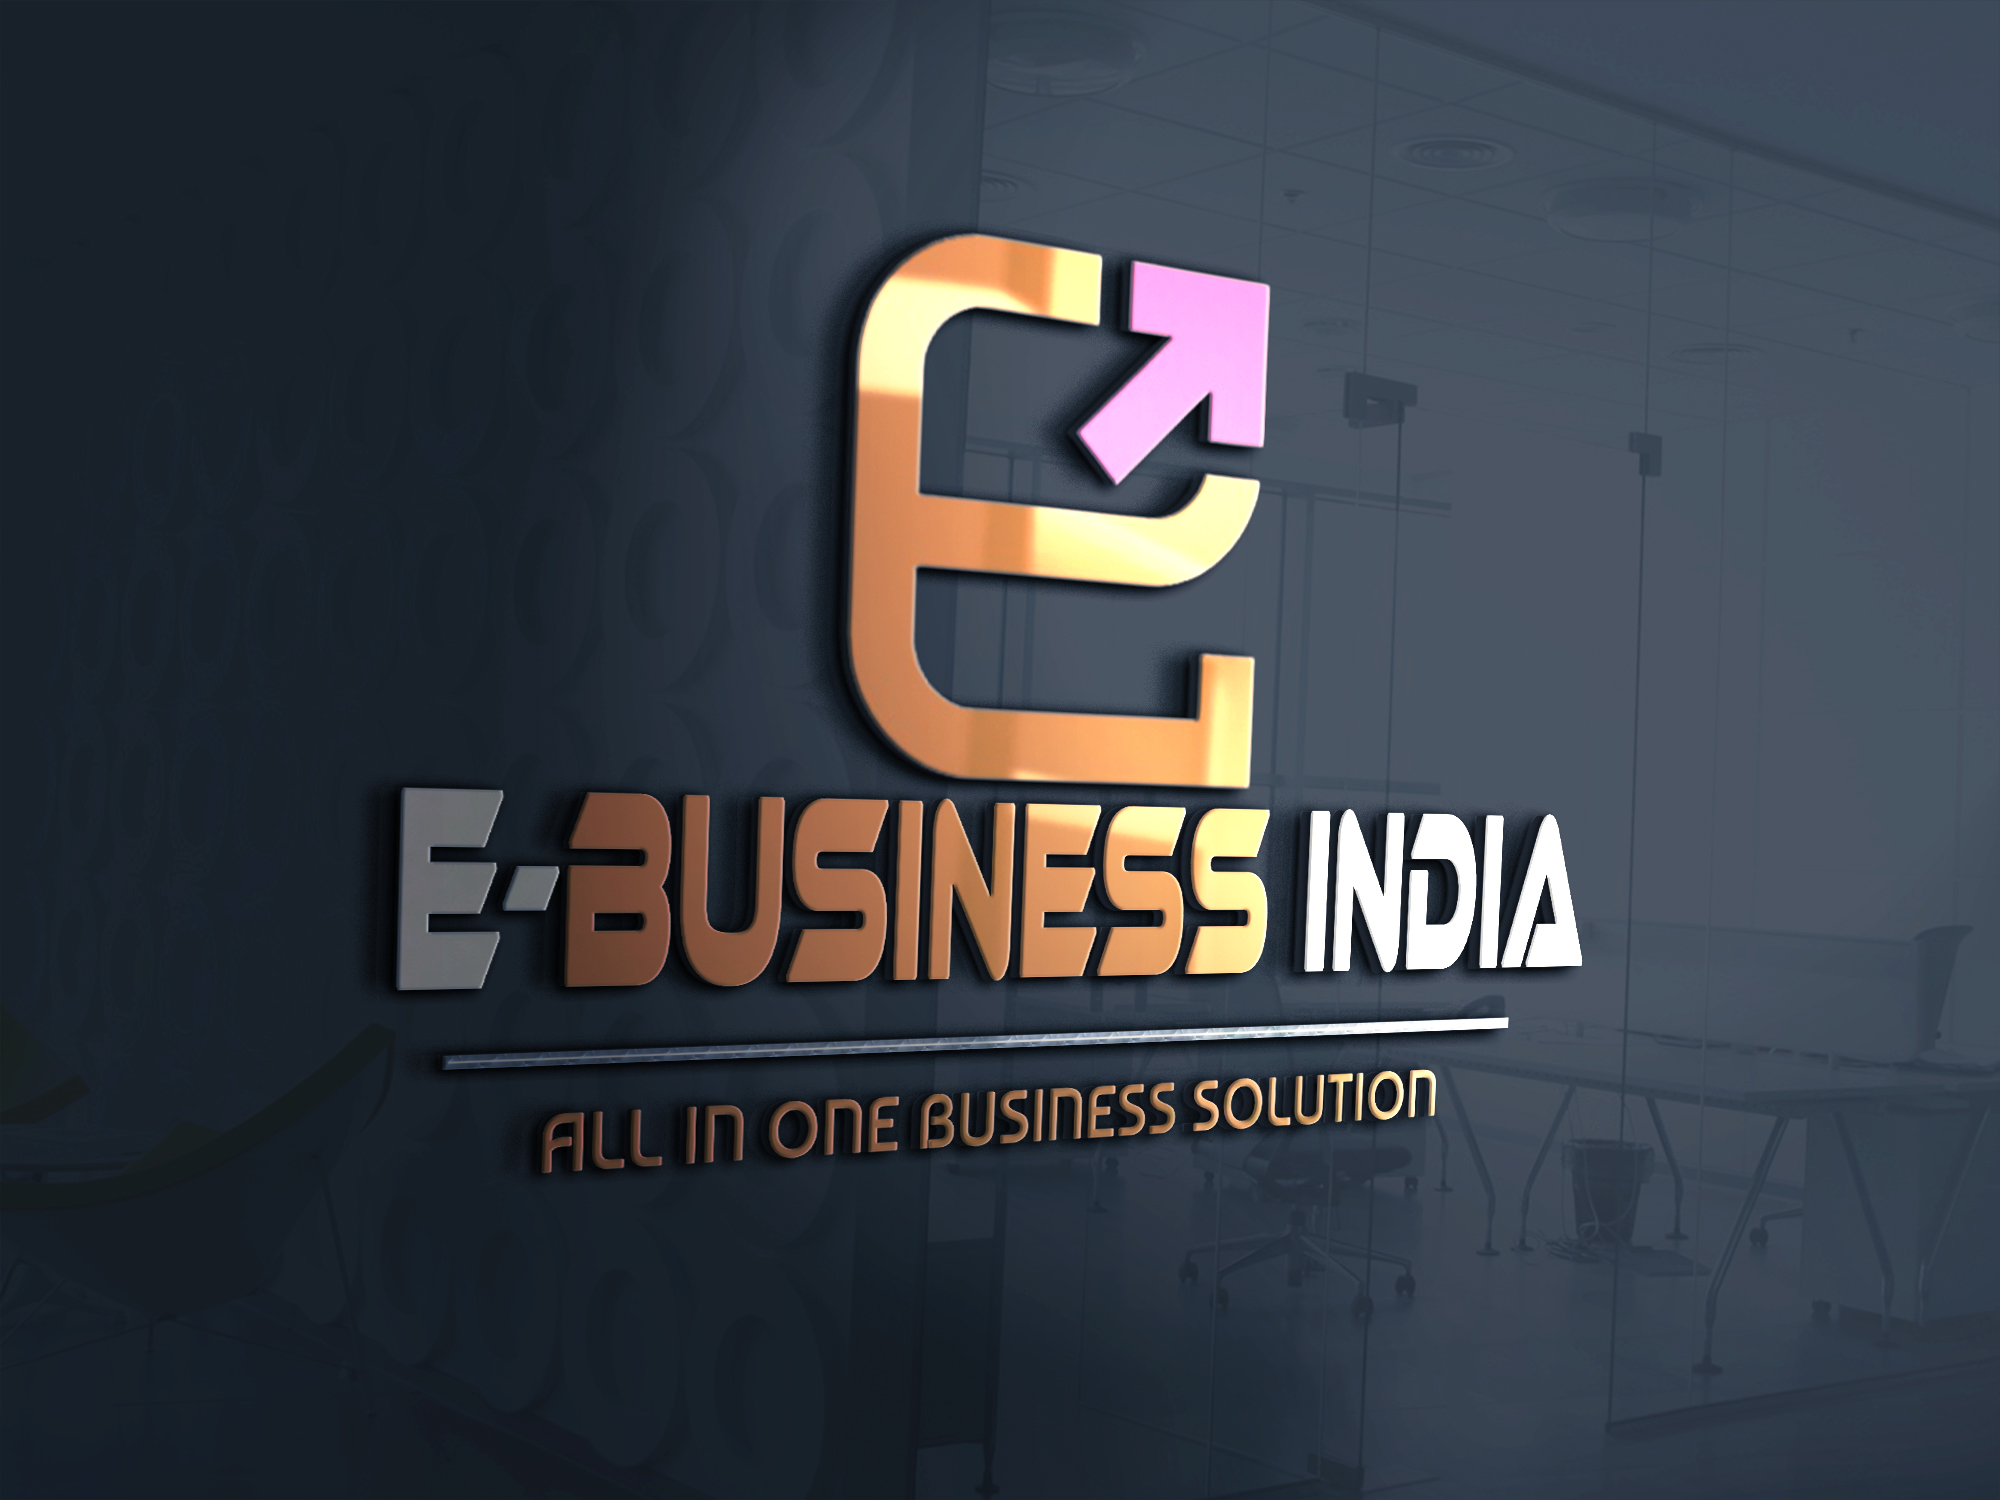 https://salesprofessionals.co.in/company/ebusiness-india